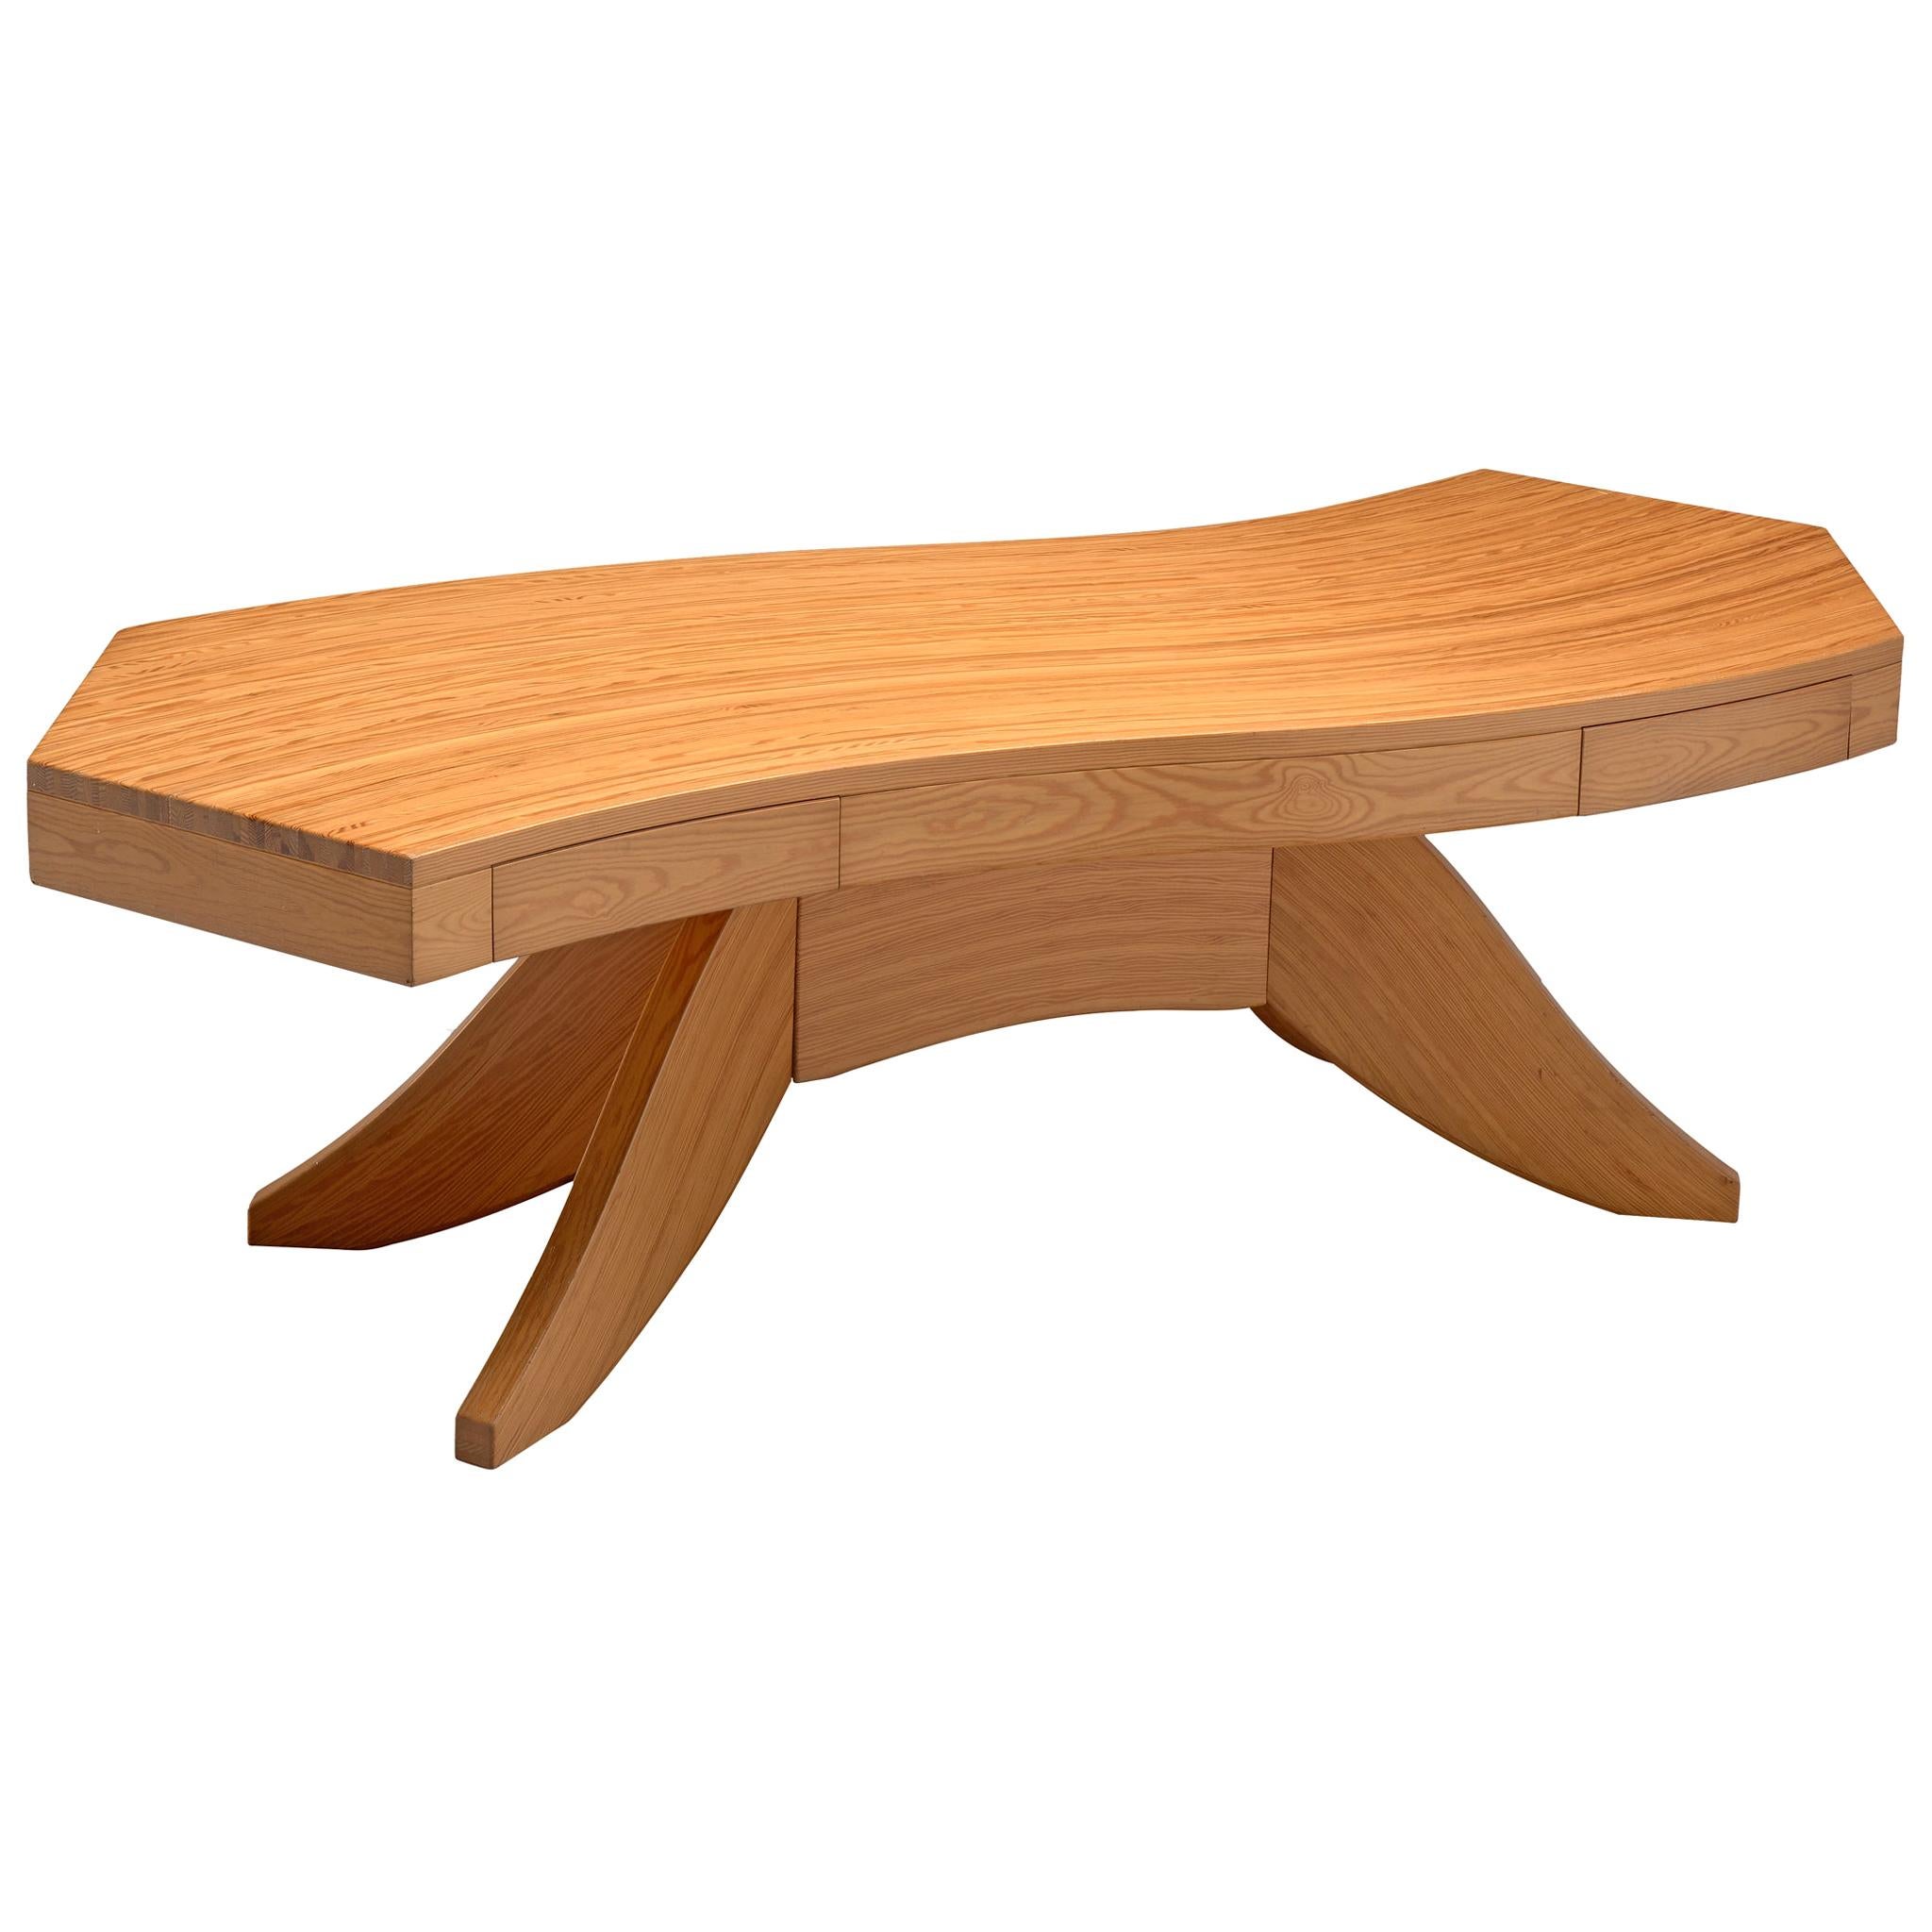 Scandinavian Pine Table with Curved Table Top